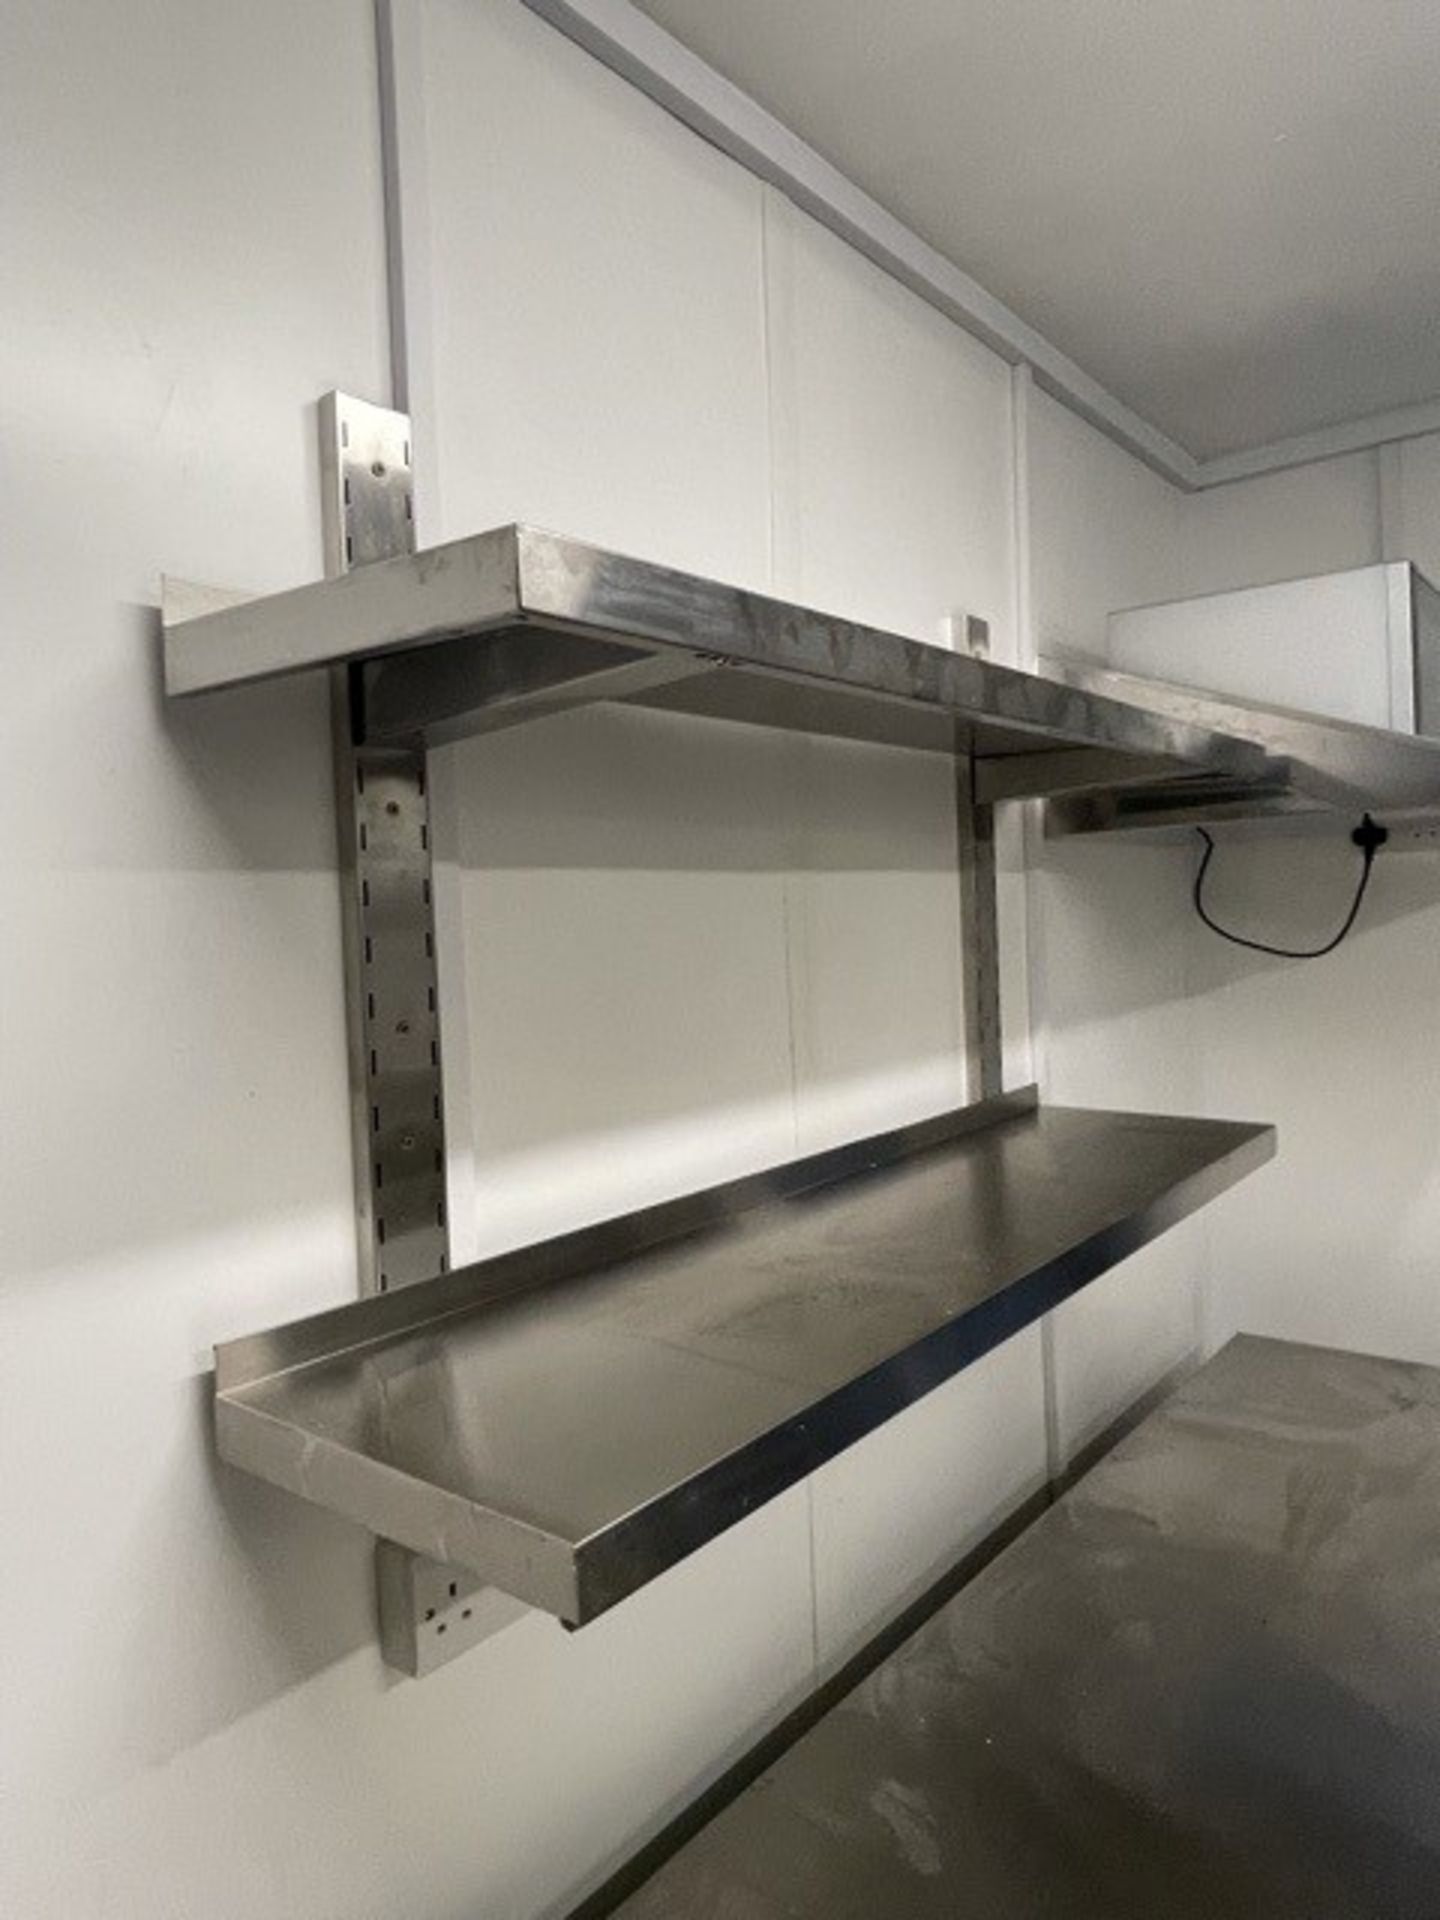 Stainless Steel Wall Shelf 2 Levels - Image 3 of 3